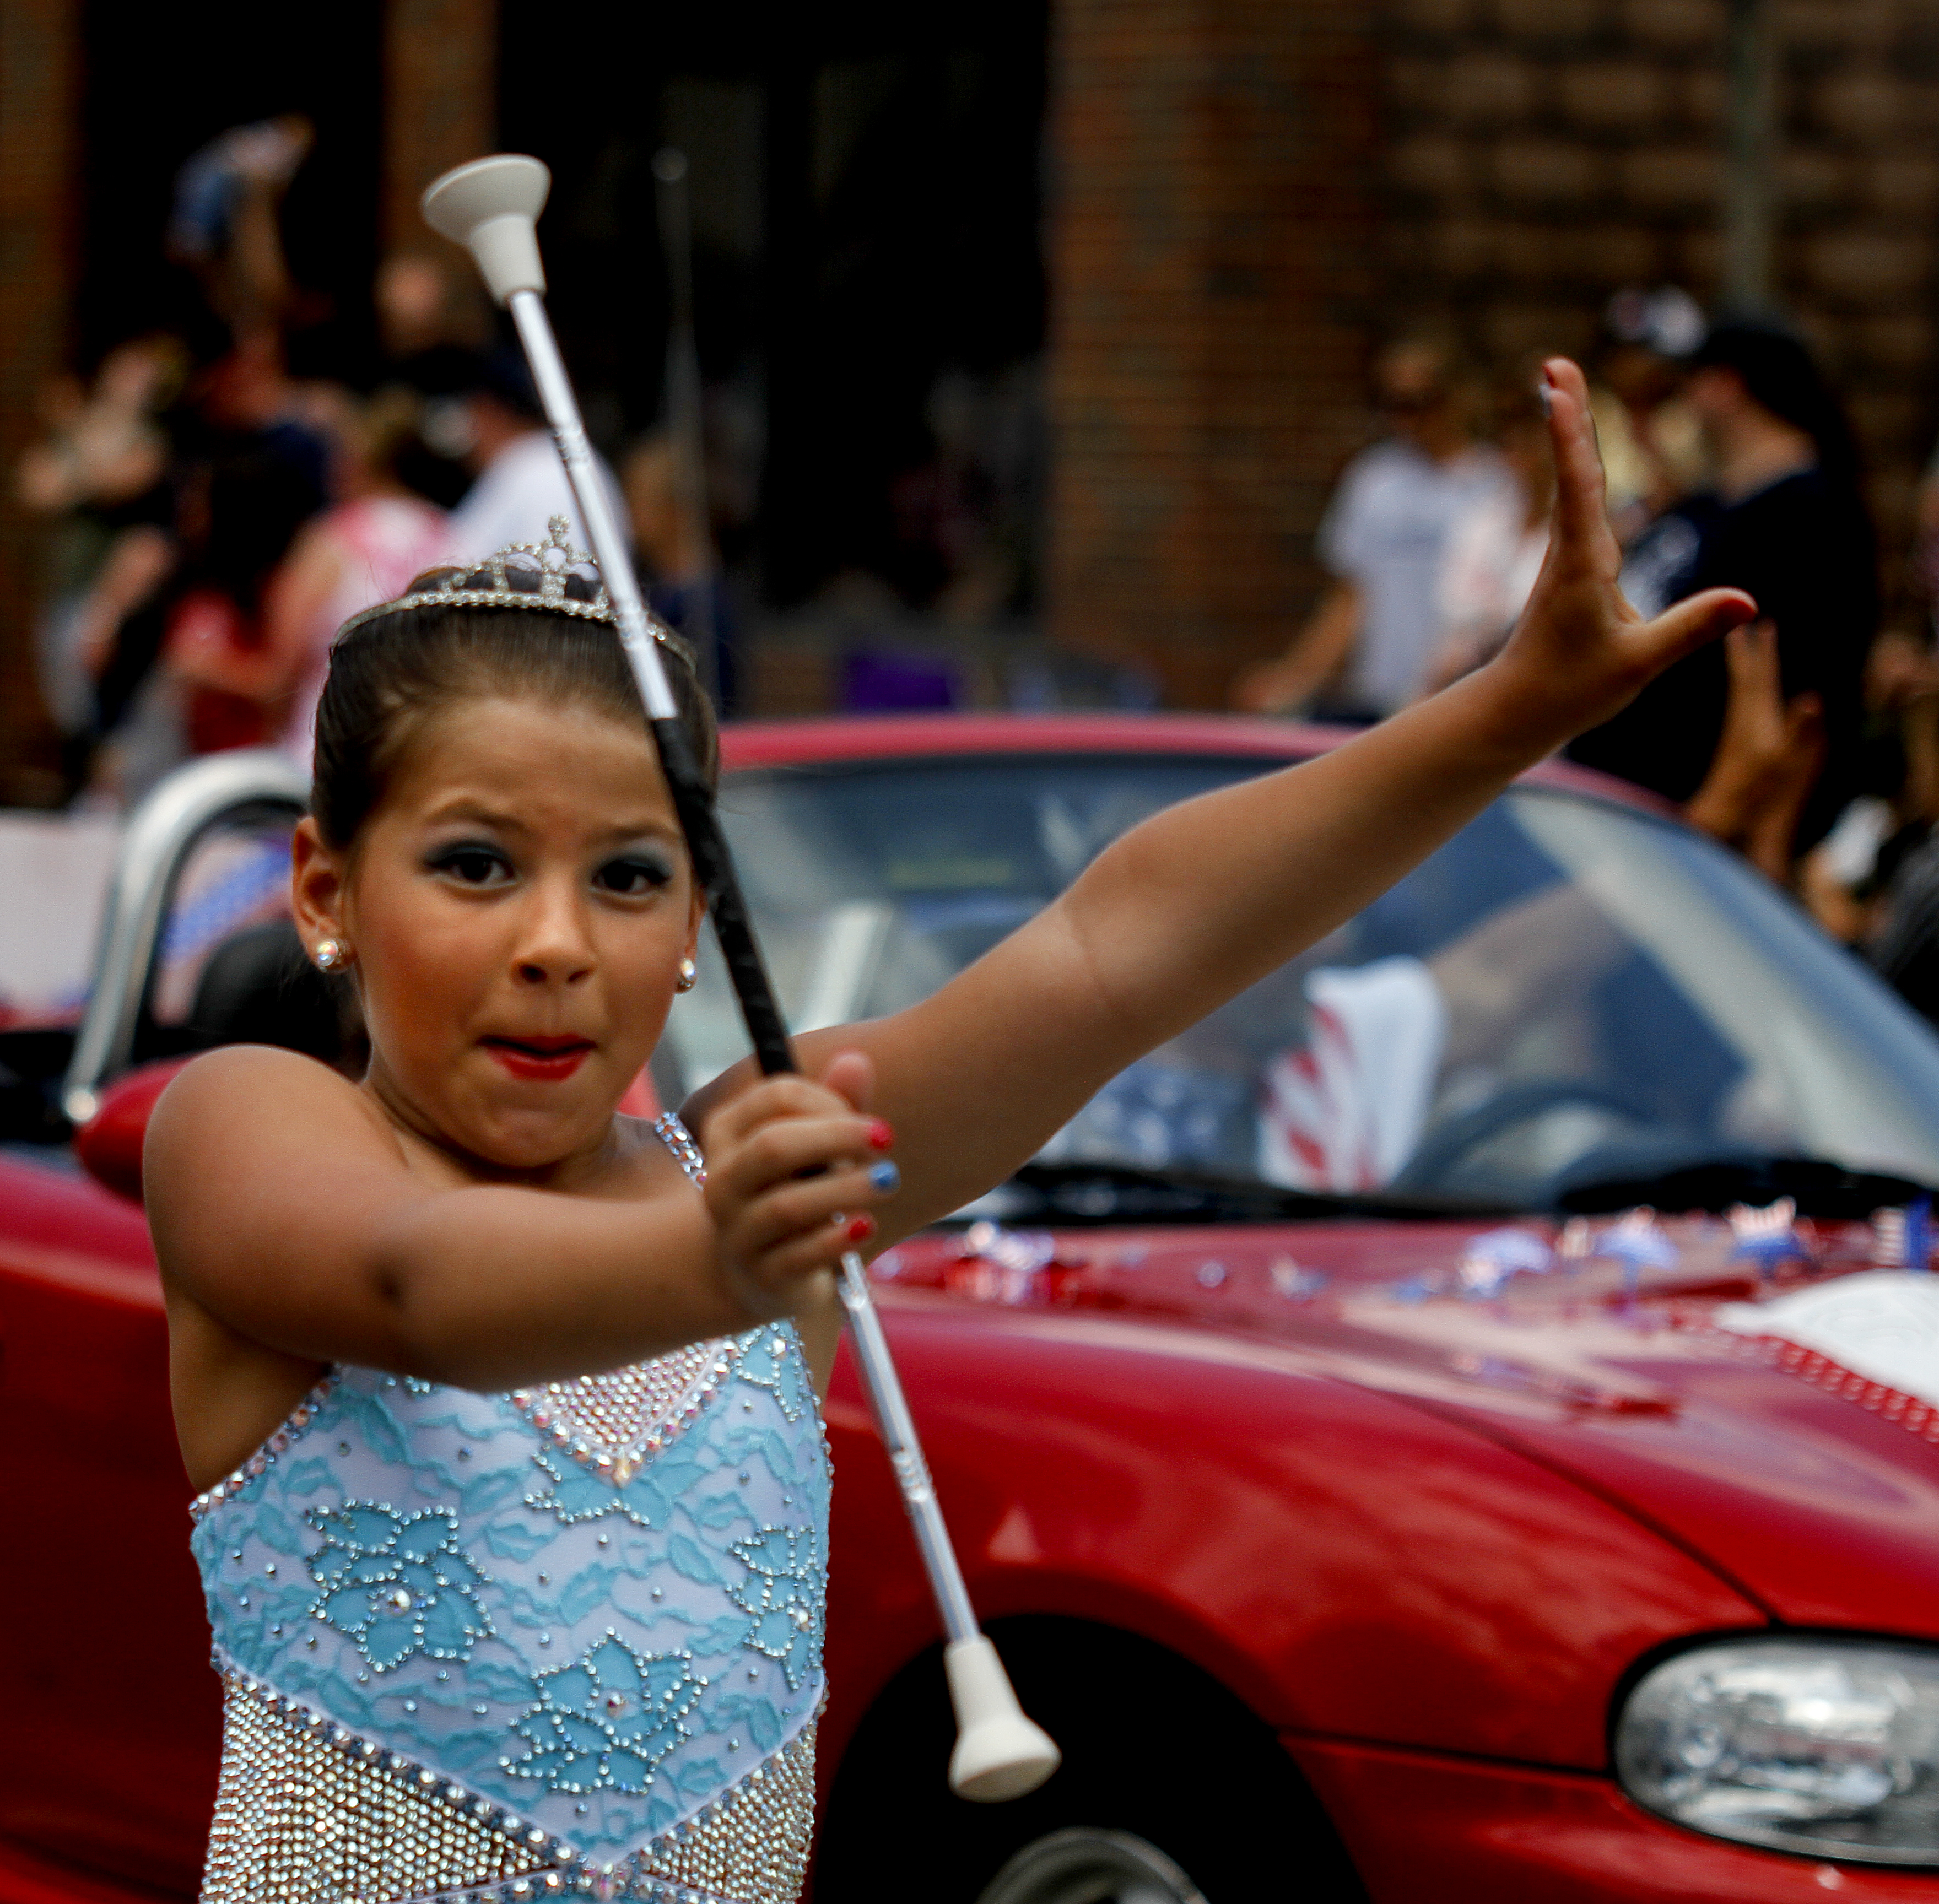 MADELYN P. HASTINGS | THE VINDICATOR

2013 Little Miss Majorette of Ohio, Isabella Rexroad performs during the parade at the hot dog festival in downtown Niles on Sunday.